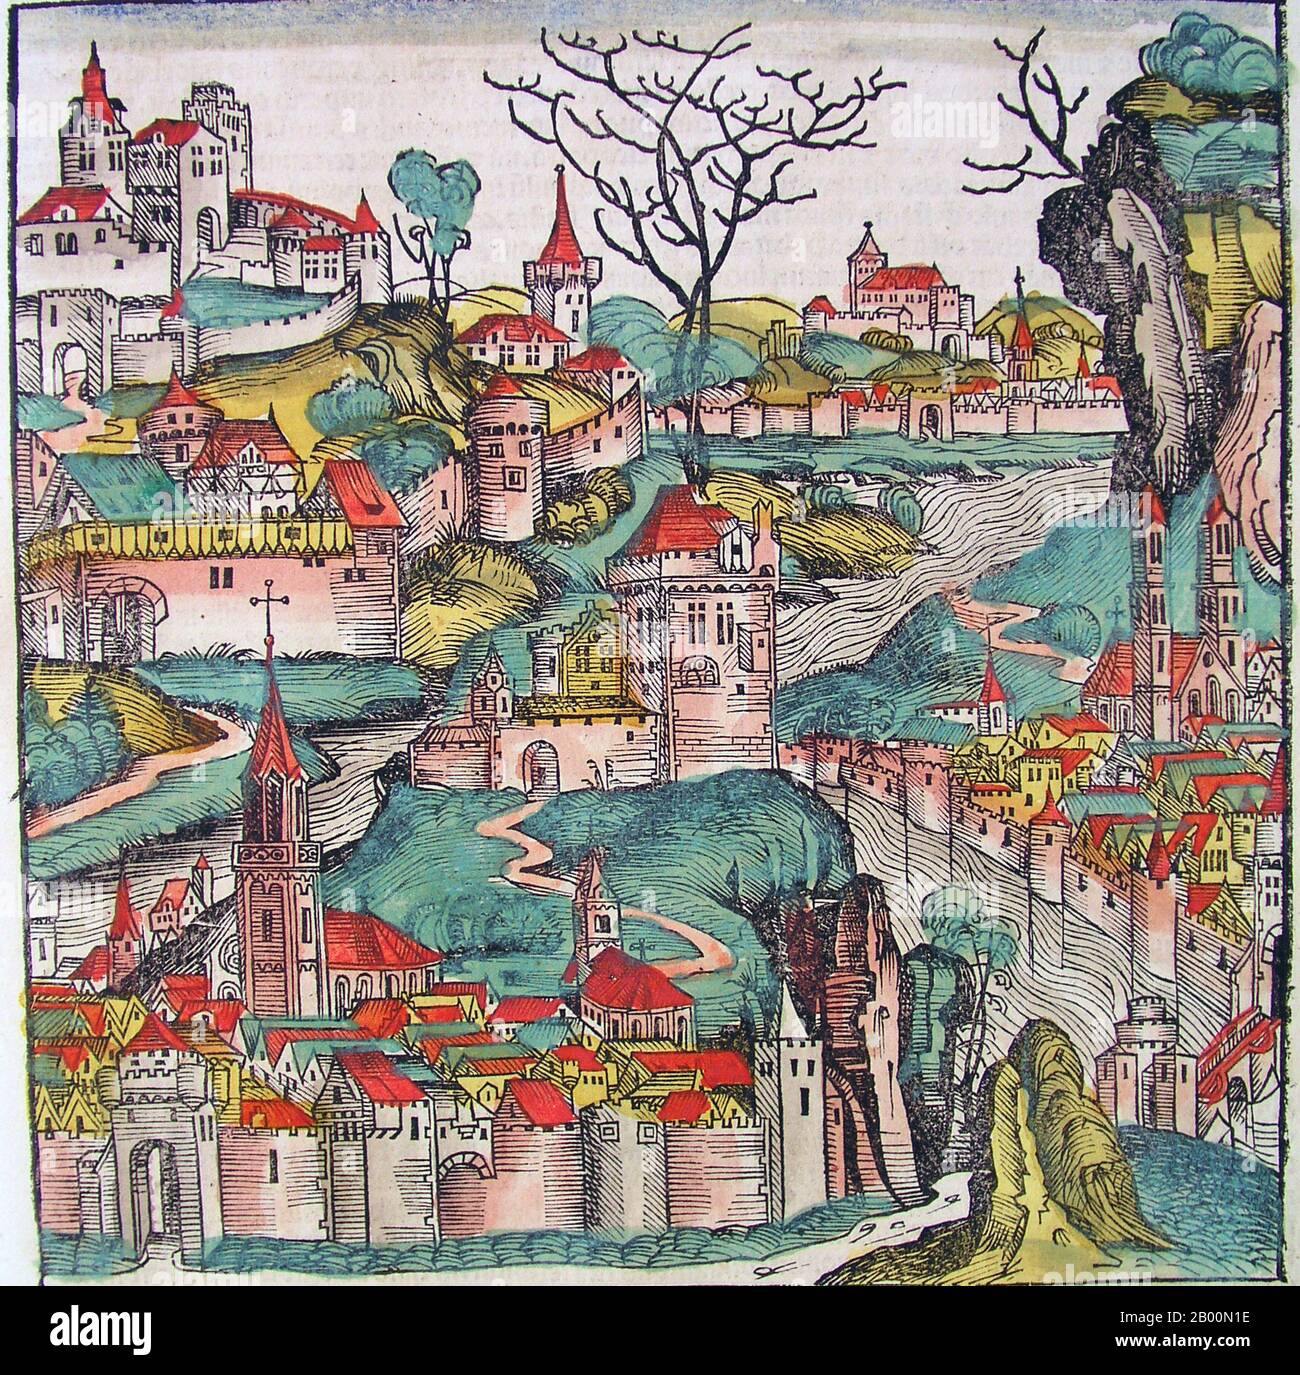 Germany: 'Achaia'. The Nuremberg Chronicle, by Hartmann Schedel (1440-1514), 1493.  The Nuremberg Chronicle is an illustrated world history. Its structure follows the story of human history as related in the Bible; it includes the histories of a number of important Western cities. Written in Latin by Hartmann Schedel, with a version in German translation by Georg Alt, it appeared in 1493. It is one of the best-documented early printed books. It is classified as an incunabulum – that is, a book, pamphlet, or broadside that was printed (not handwritten) before the year 1501 in Europe. Stock Photo